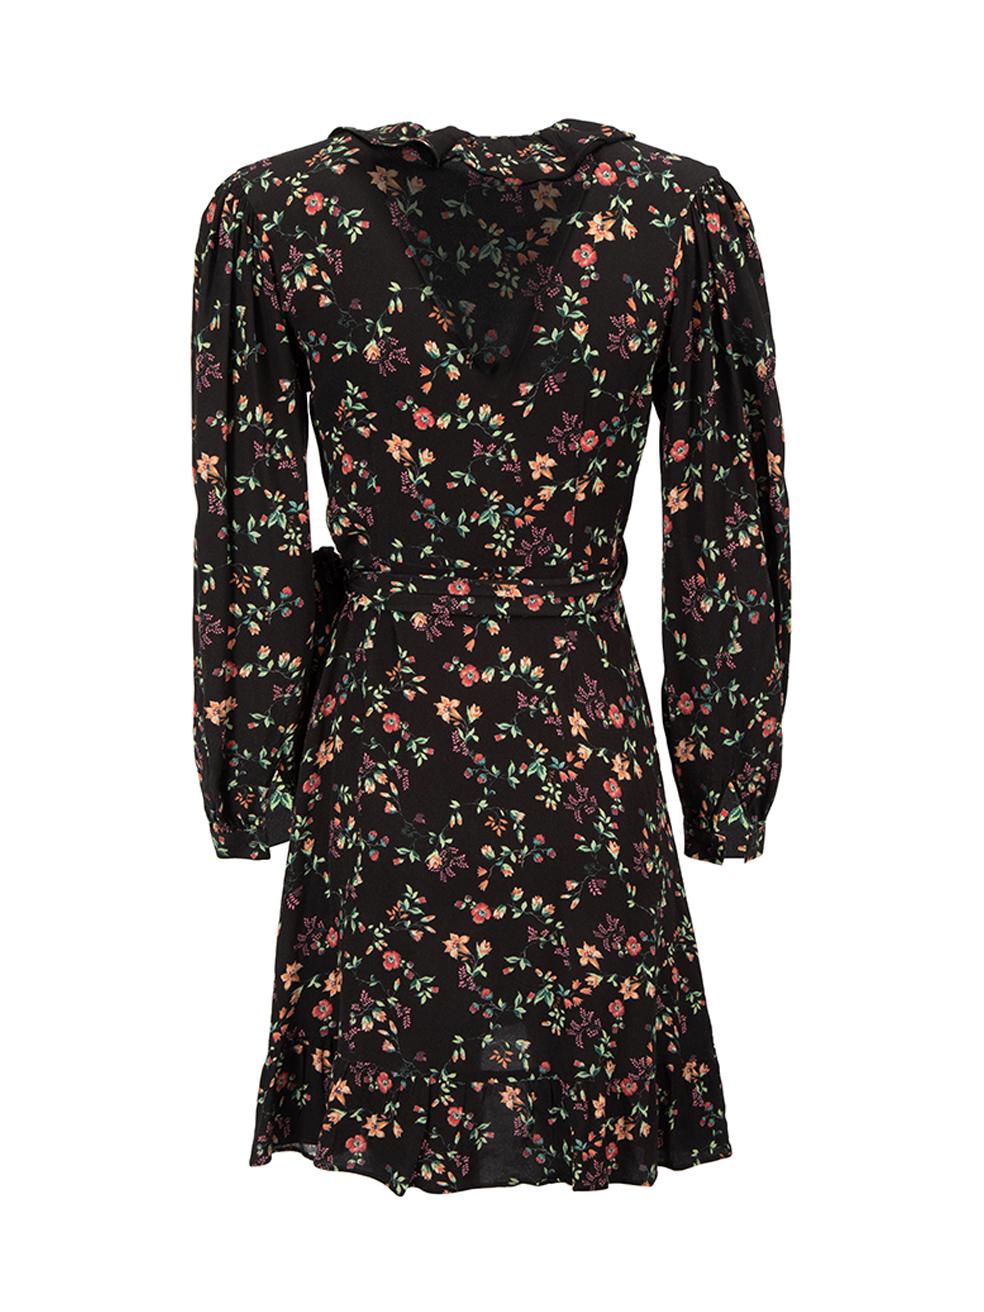 Maje Black Floral Print Mini Wrap Dress Size S In Good Condition For Sale In London, GB